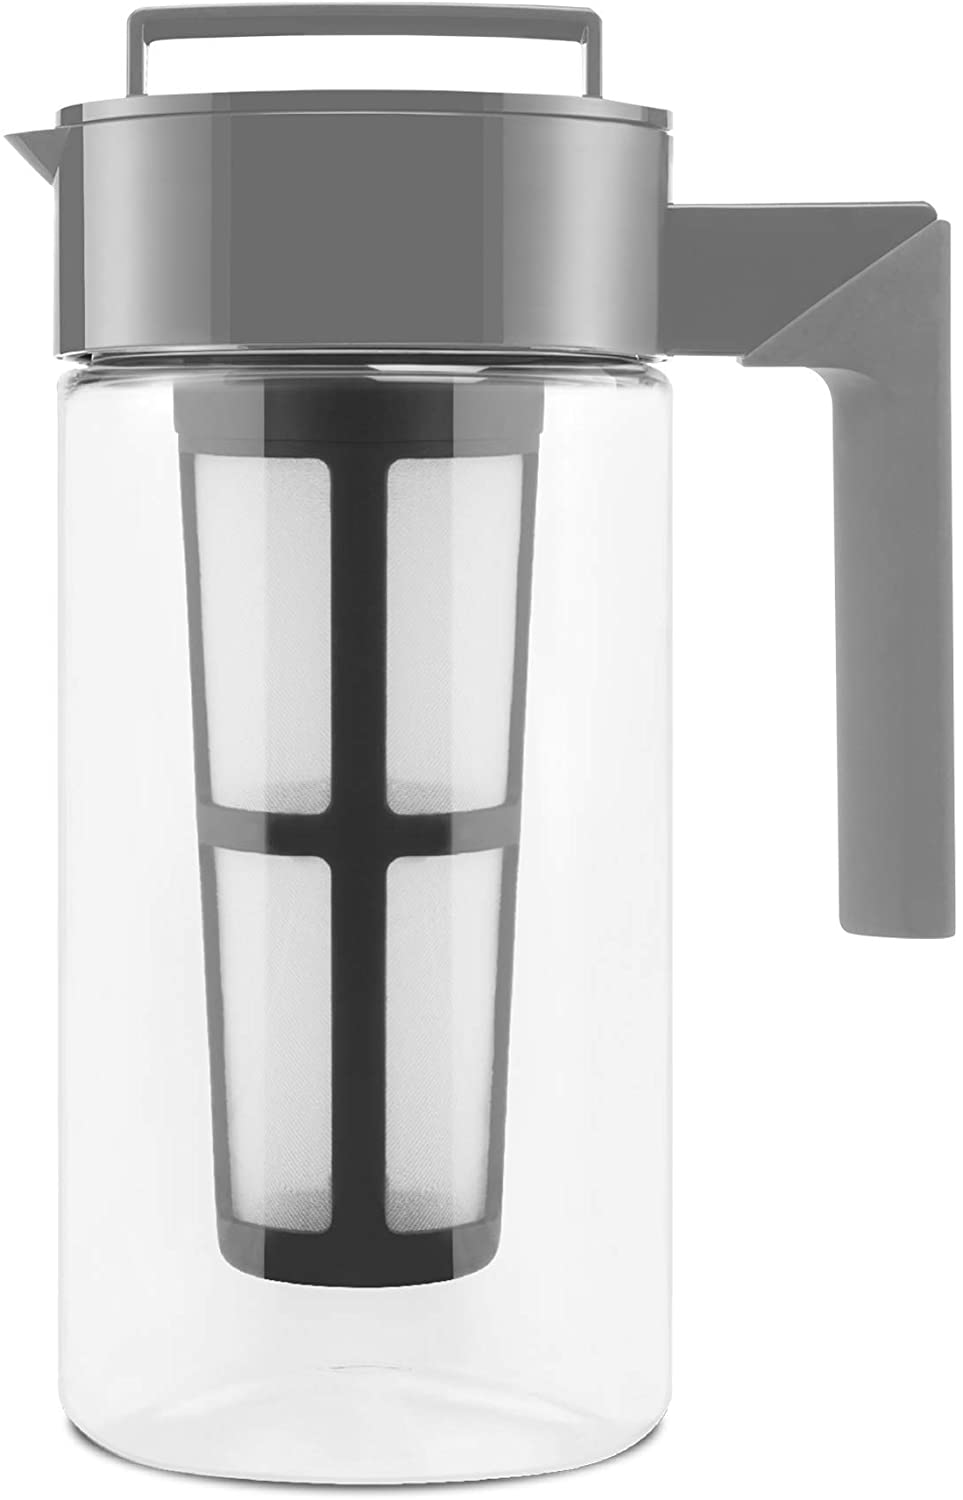 TAKEYA Patented Deluxe Cold Brew Coffee Maker, One Quart, Black